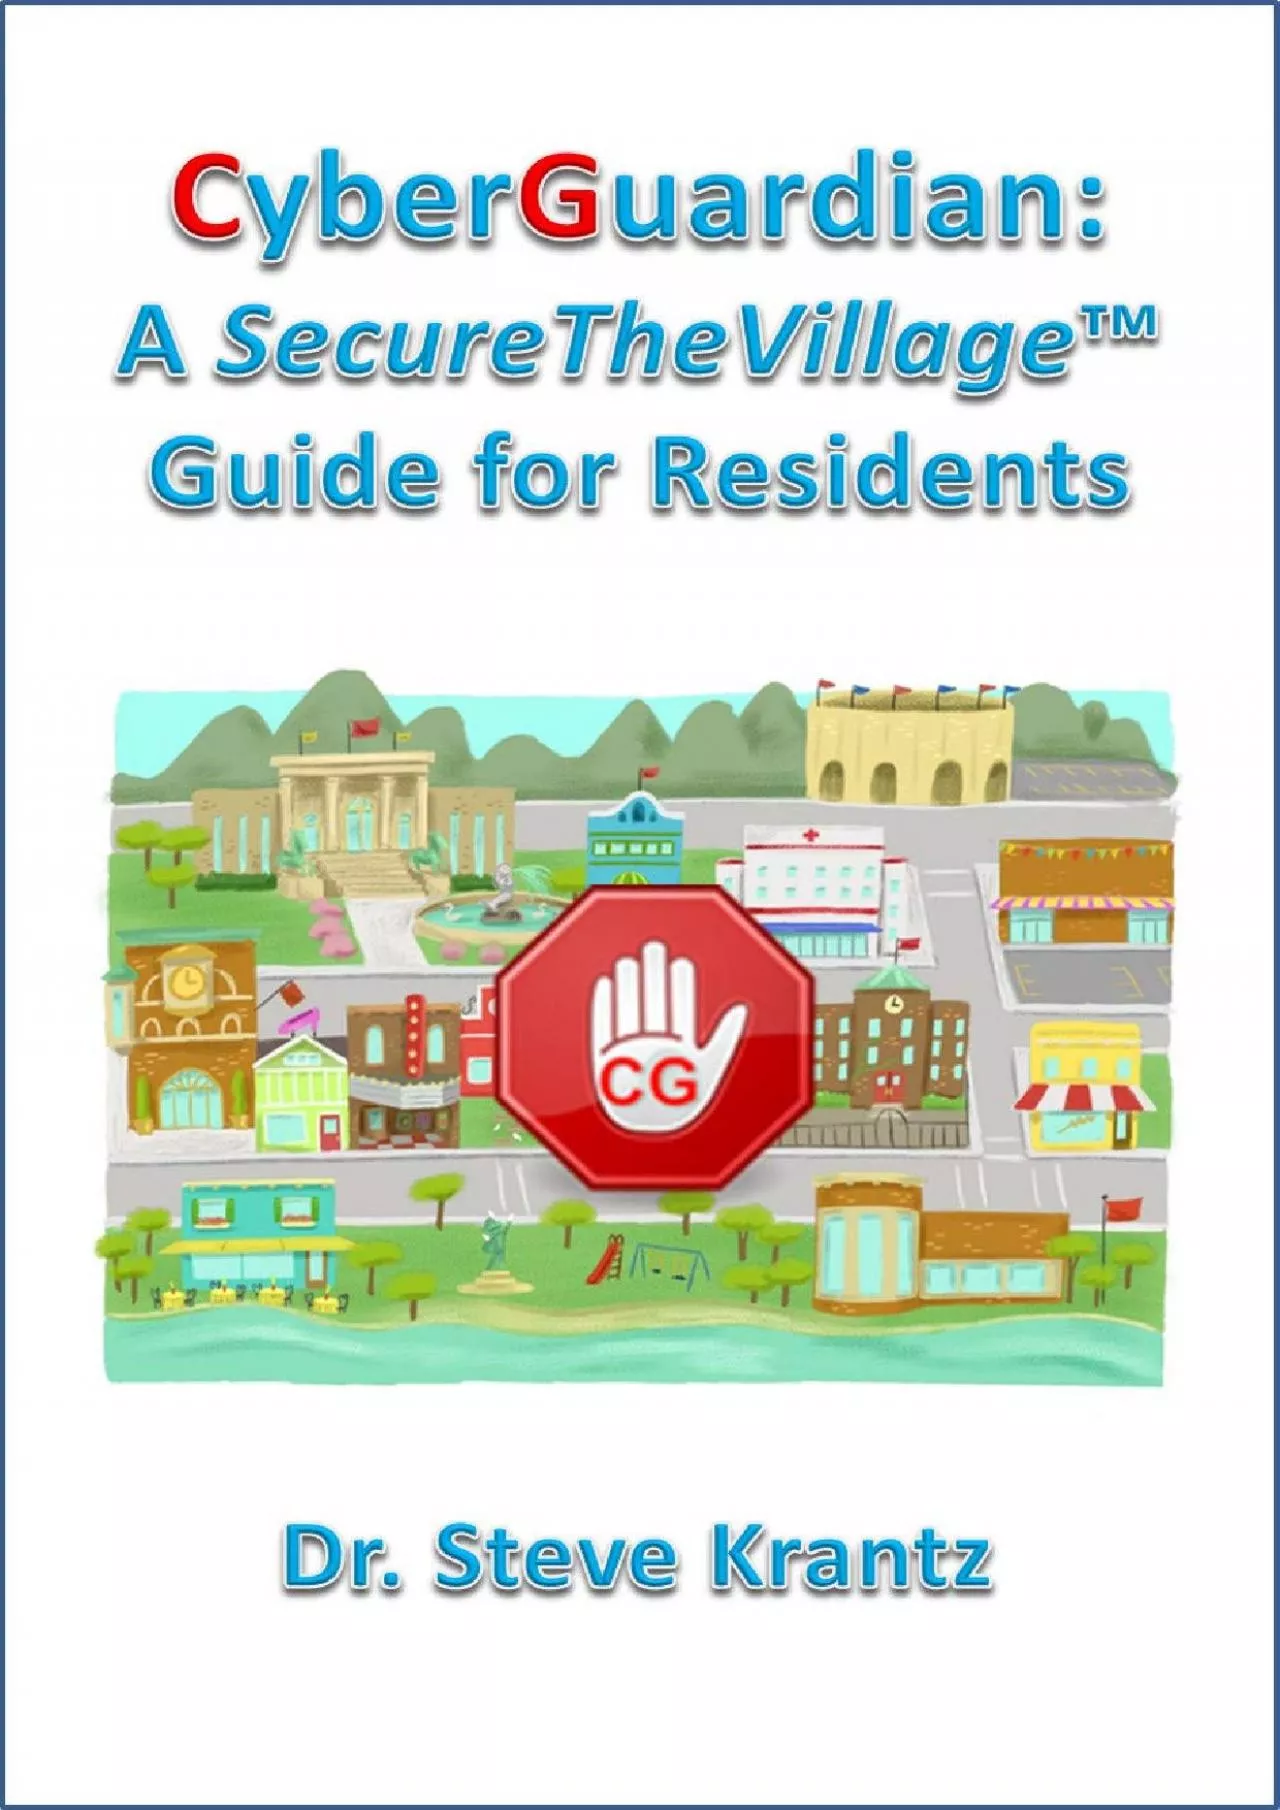 [FREE]-CyberGuardian: A SecureTheVillage Guide for Residents